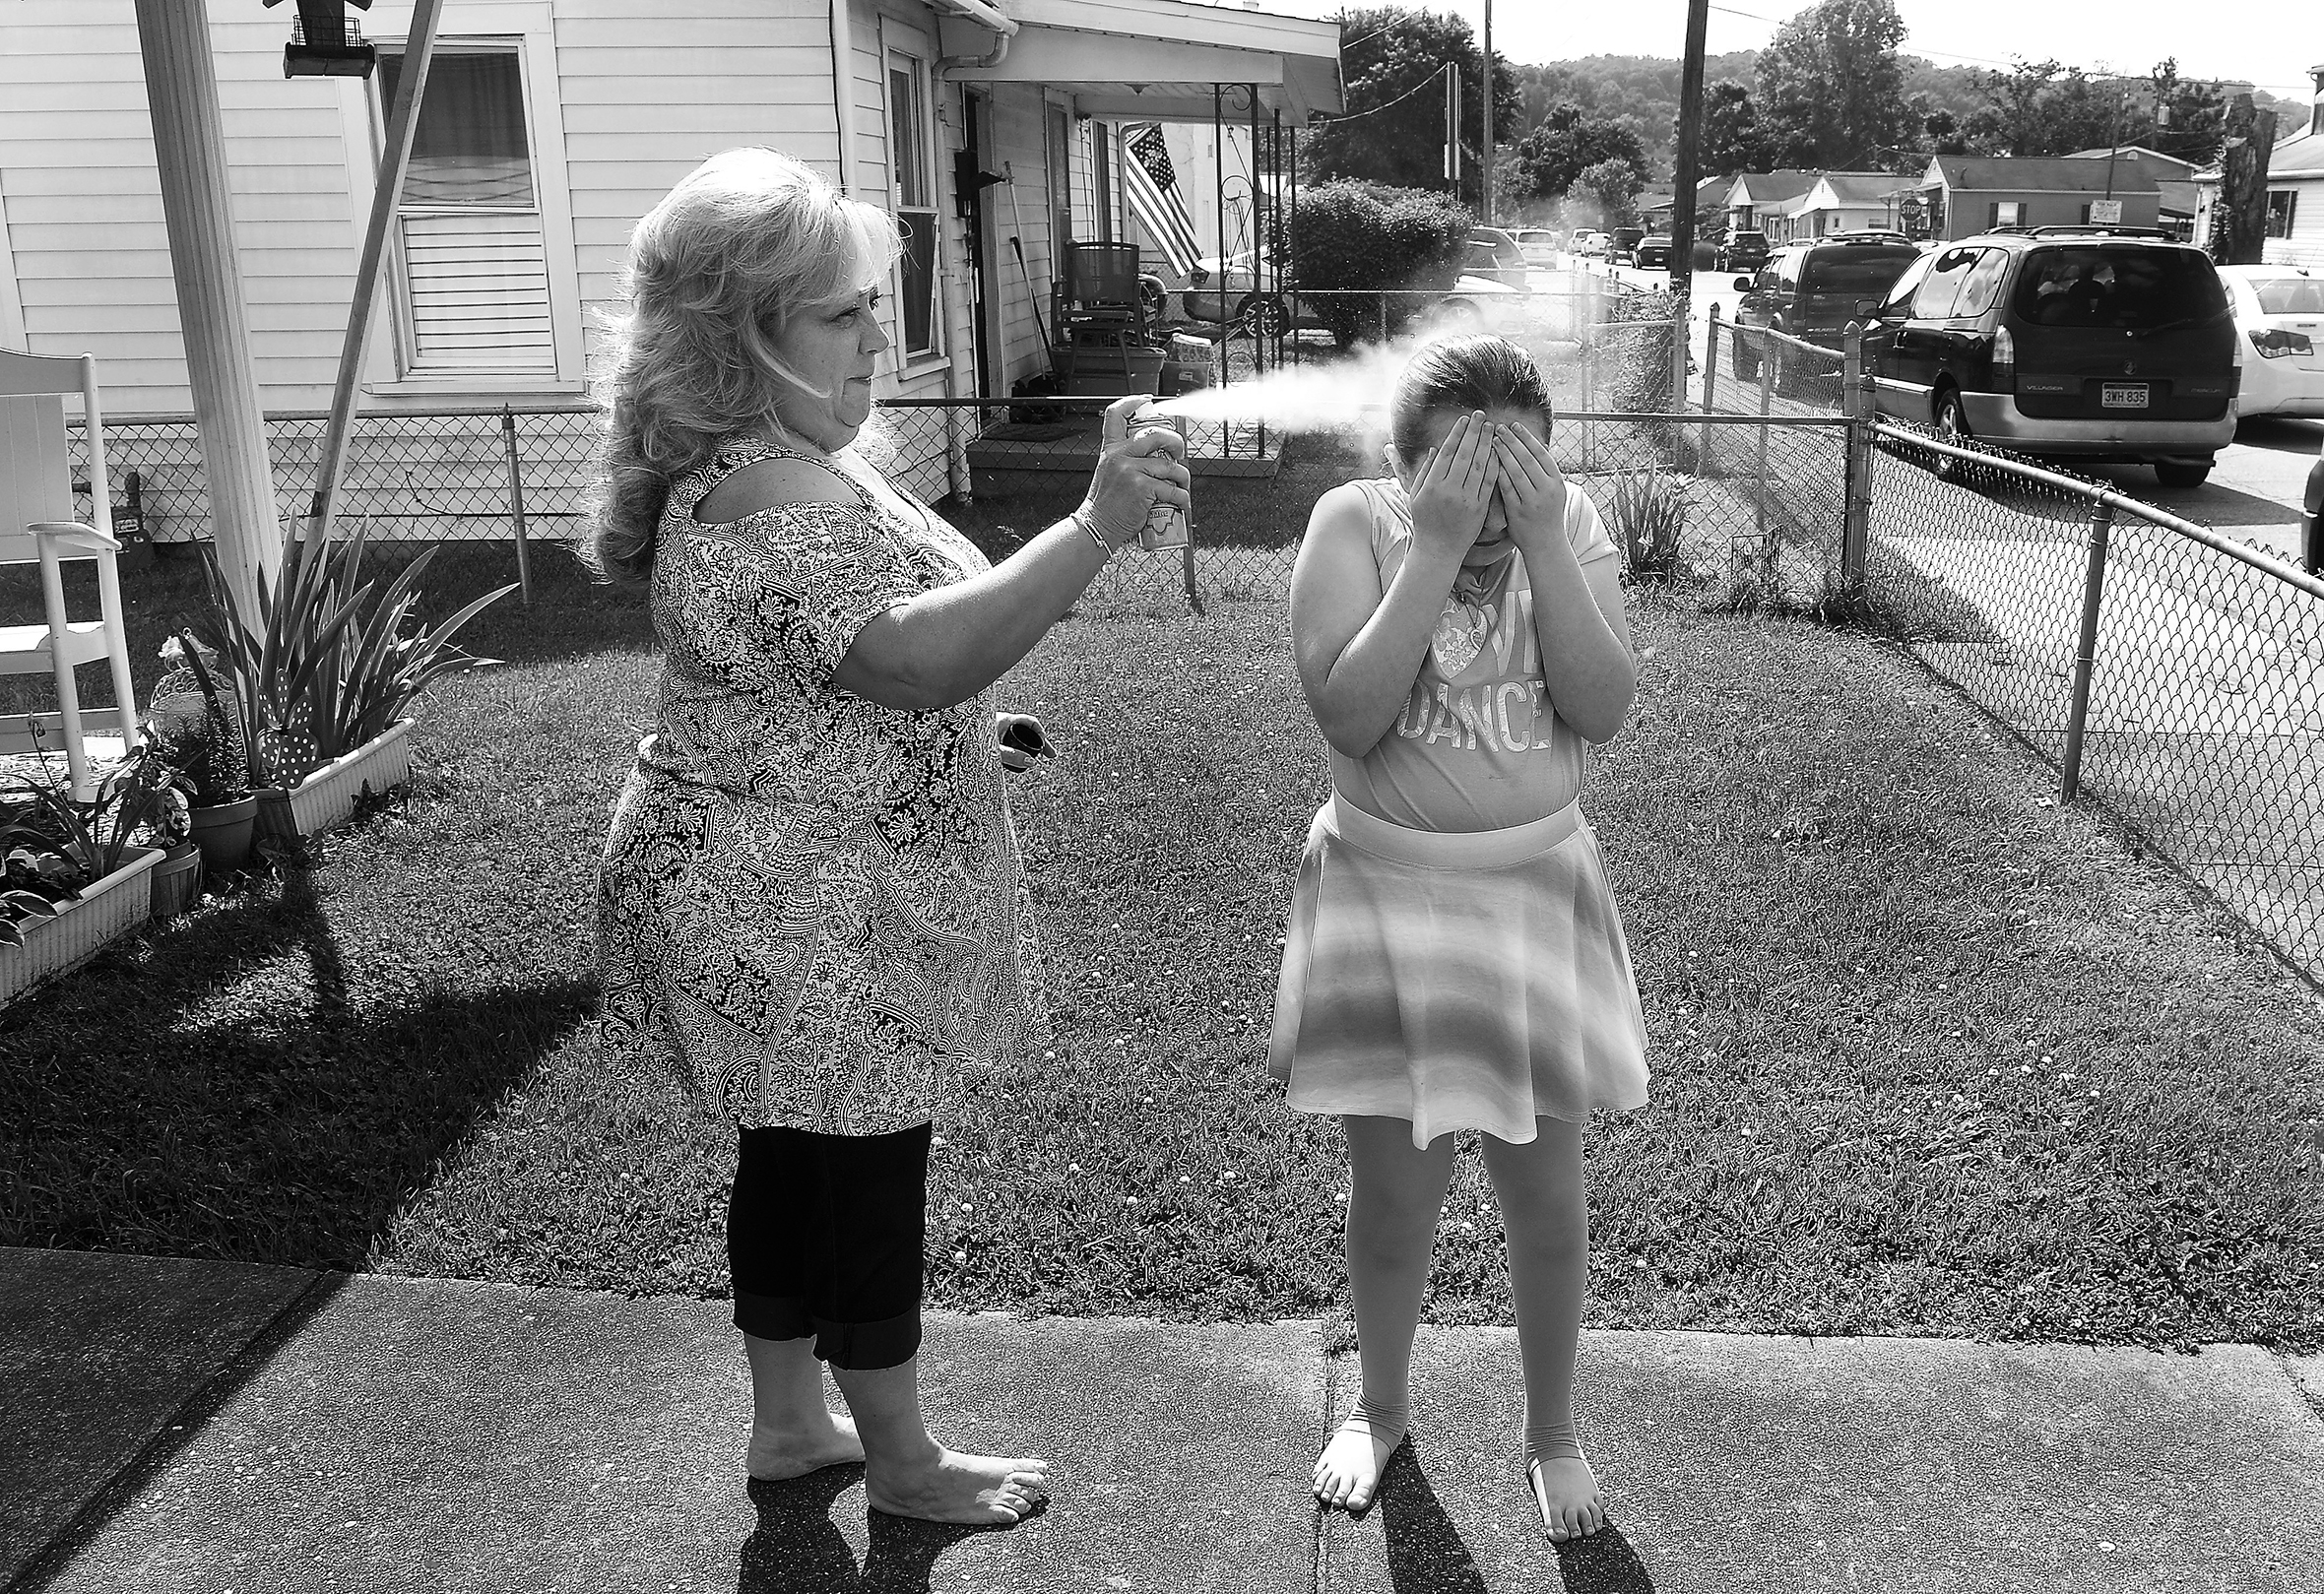 A woman with teased, blond long hair sprays something on a tween girl’s hair as the girl covers her face with her hands in a suburban front yard with a front porch and chain-link fencing.